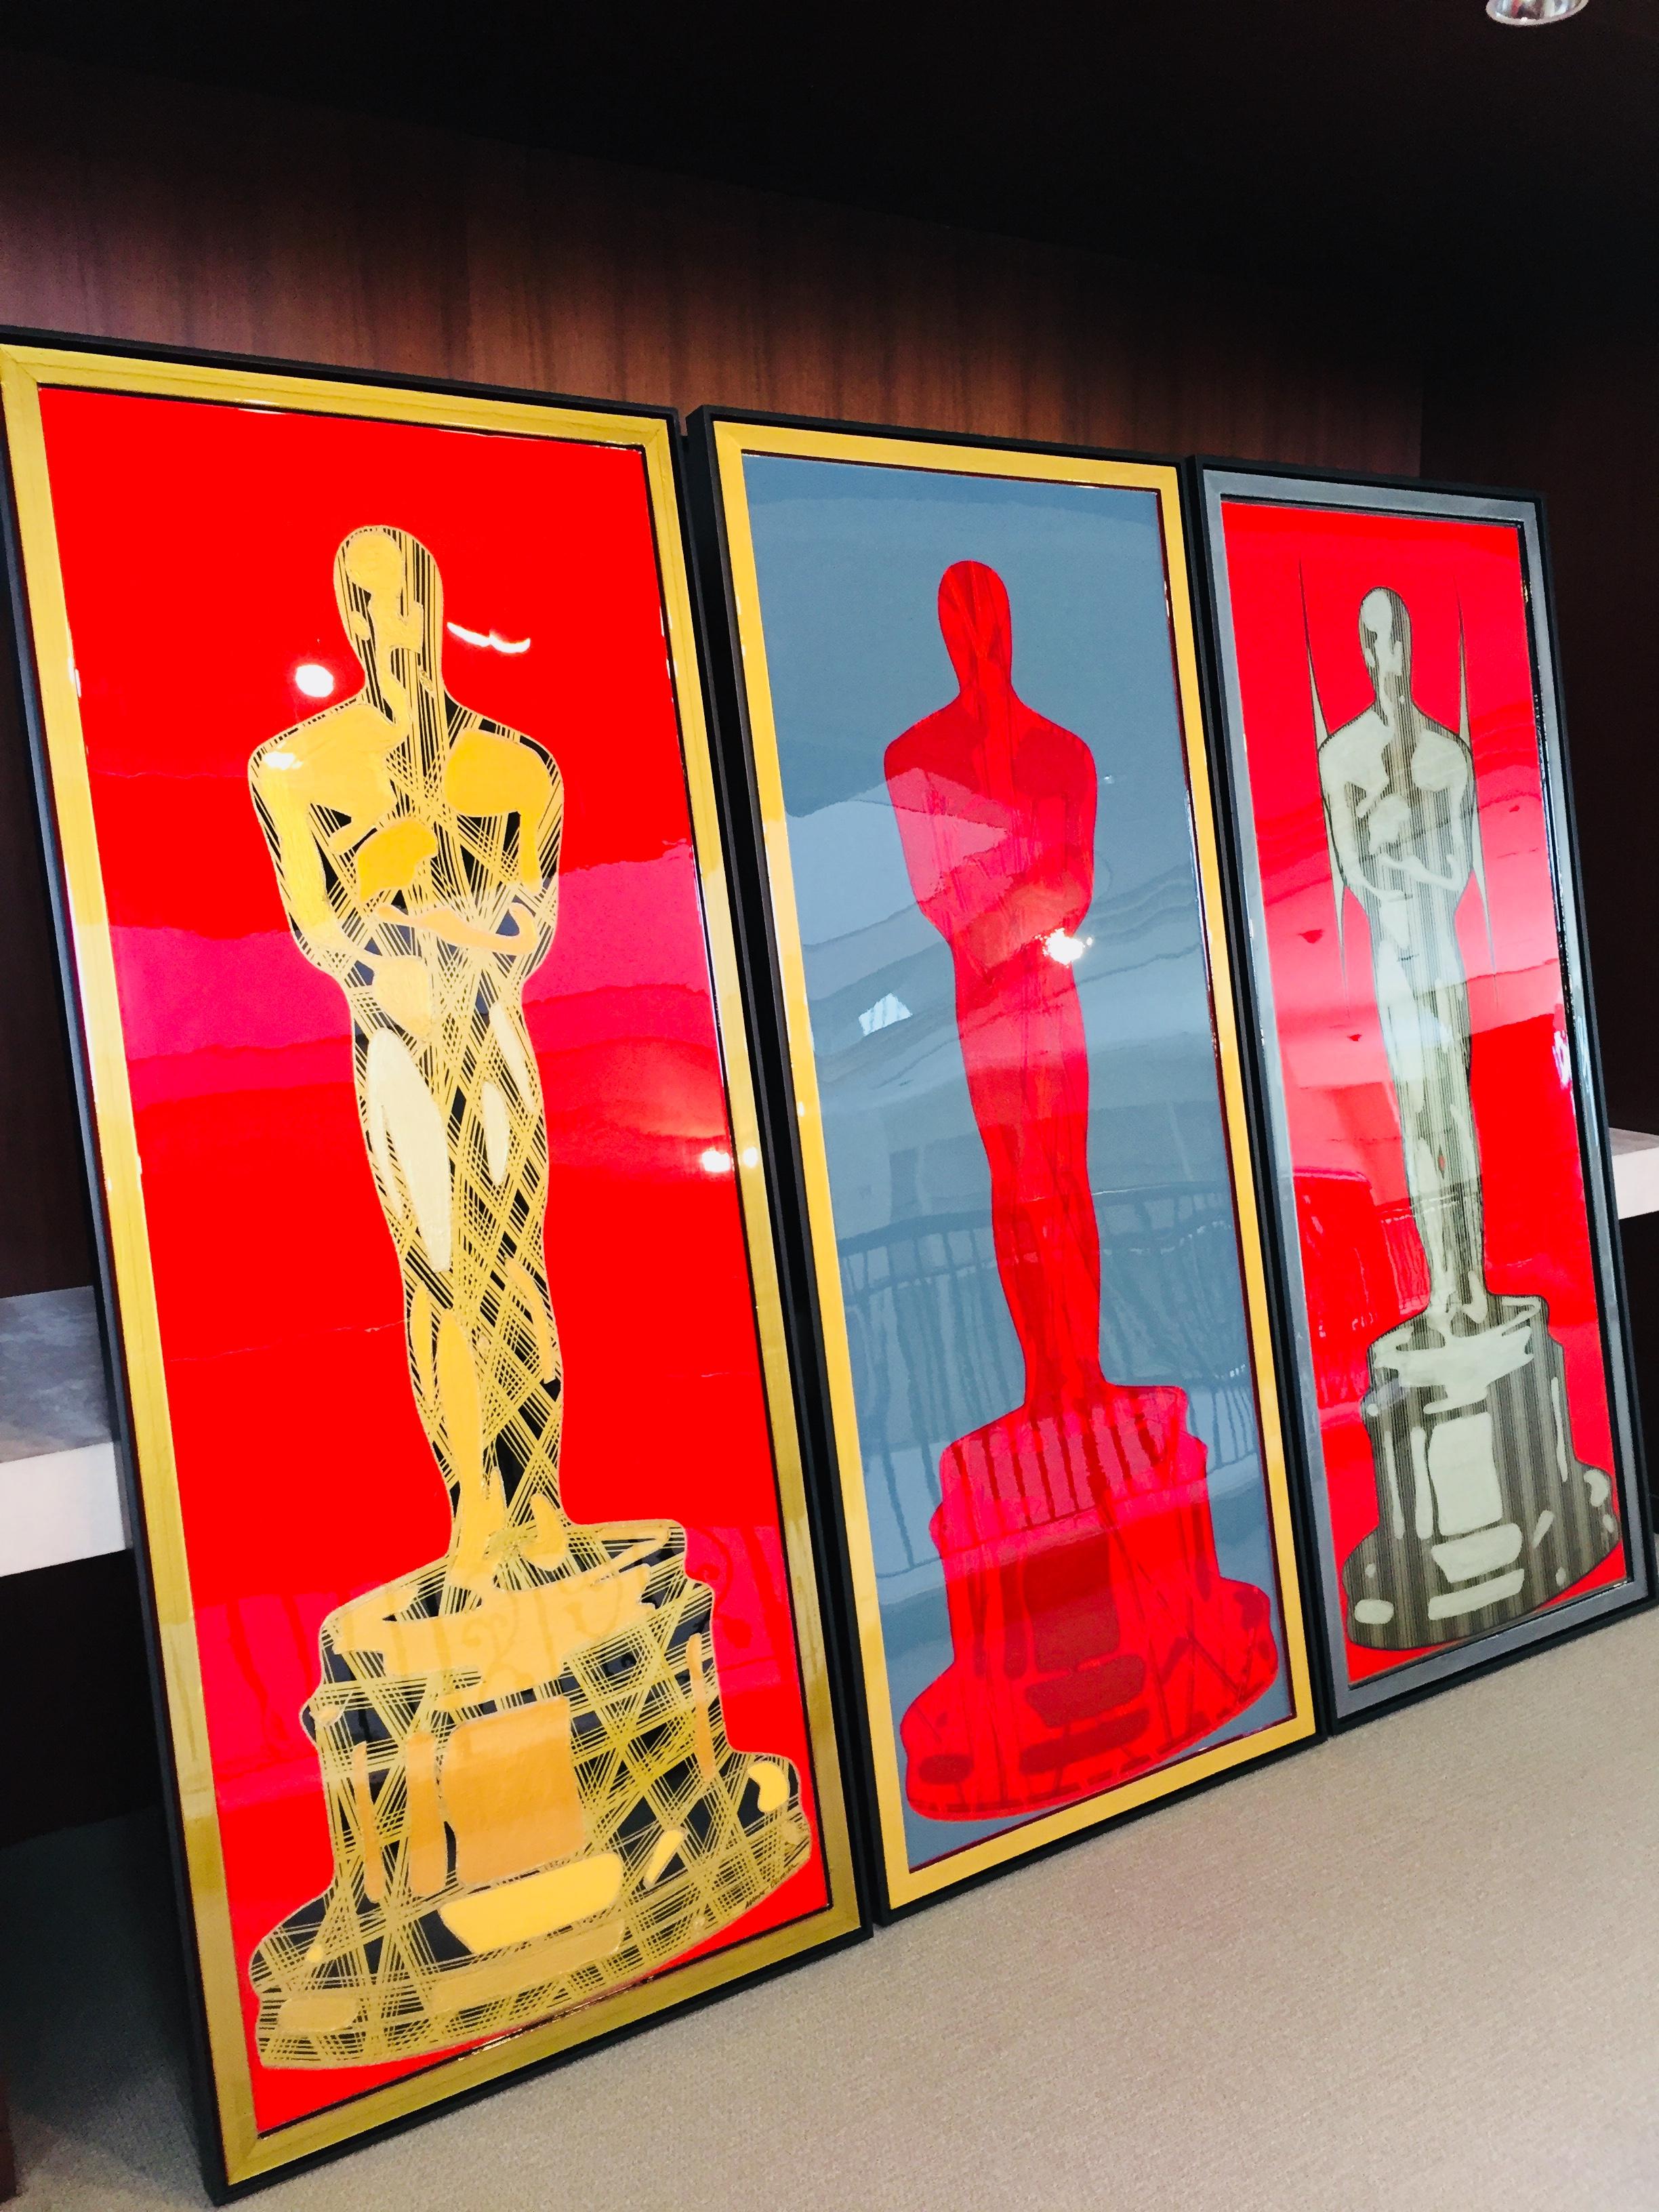 One of 2 SUNNY Oscar series by Mauro Oliveira found an amazing state in the Hollywood Hills, Ca. You can also have your own limited edition or order and original. 

Celebrating the Academy in this original and limited Oscar art series by Mauro